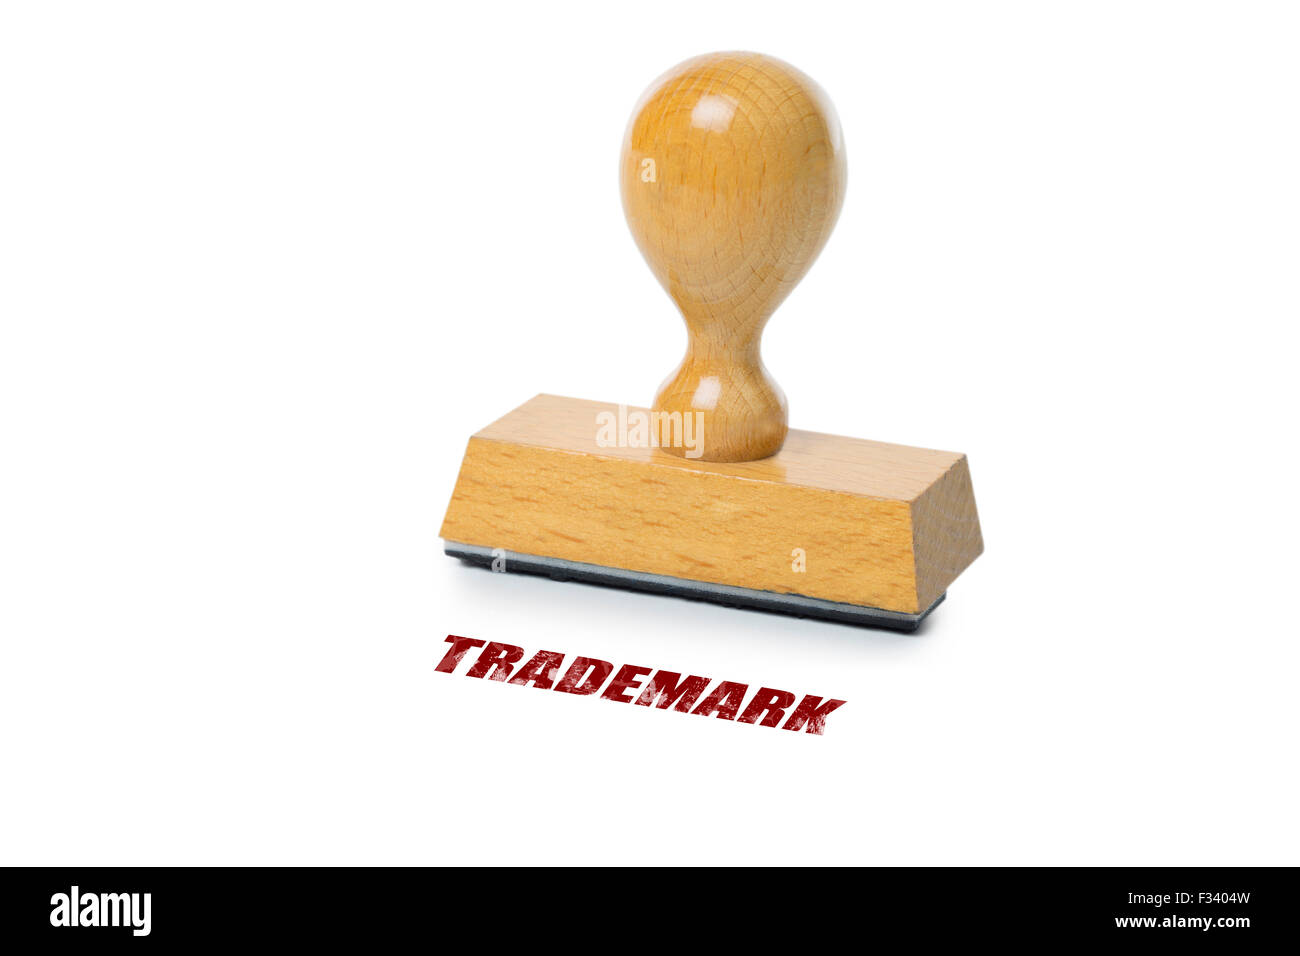 Trademark printed in red ink with wooden Rubber stamp isolated on white background Stock Photo